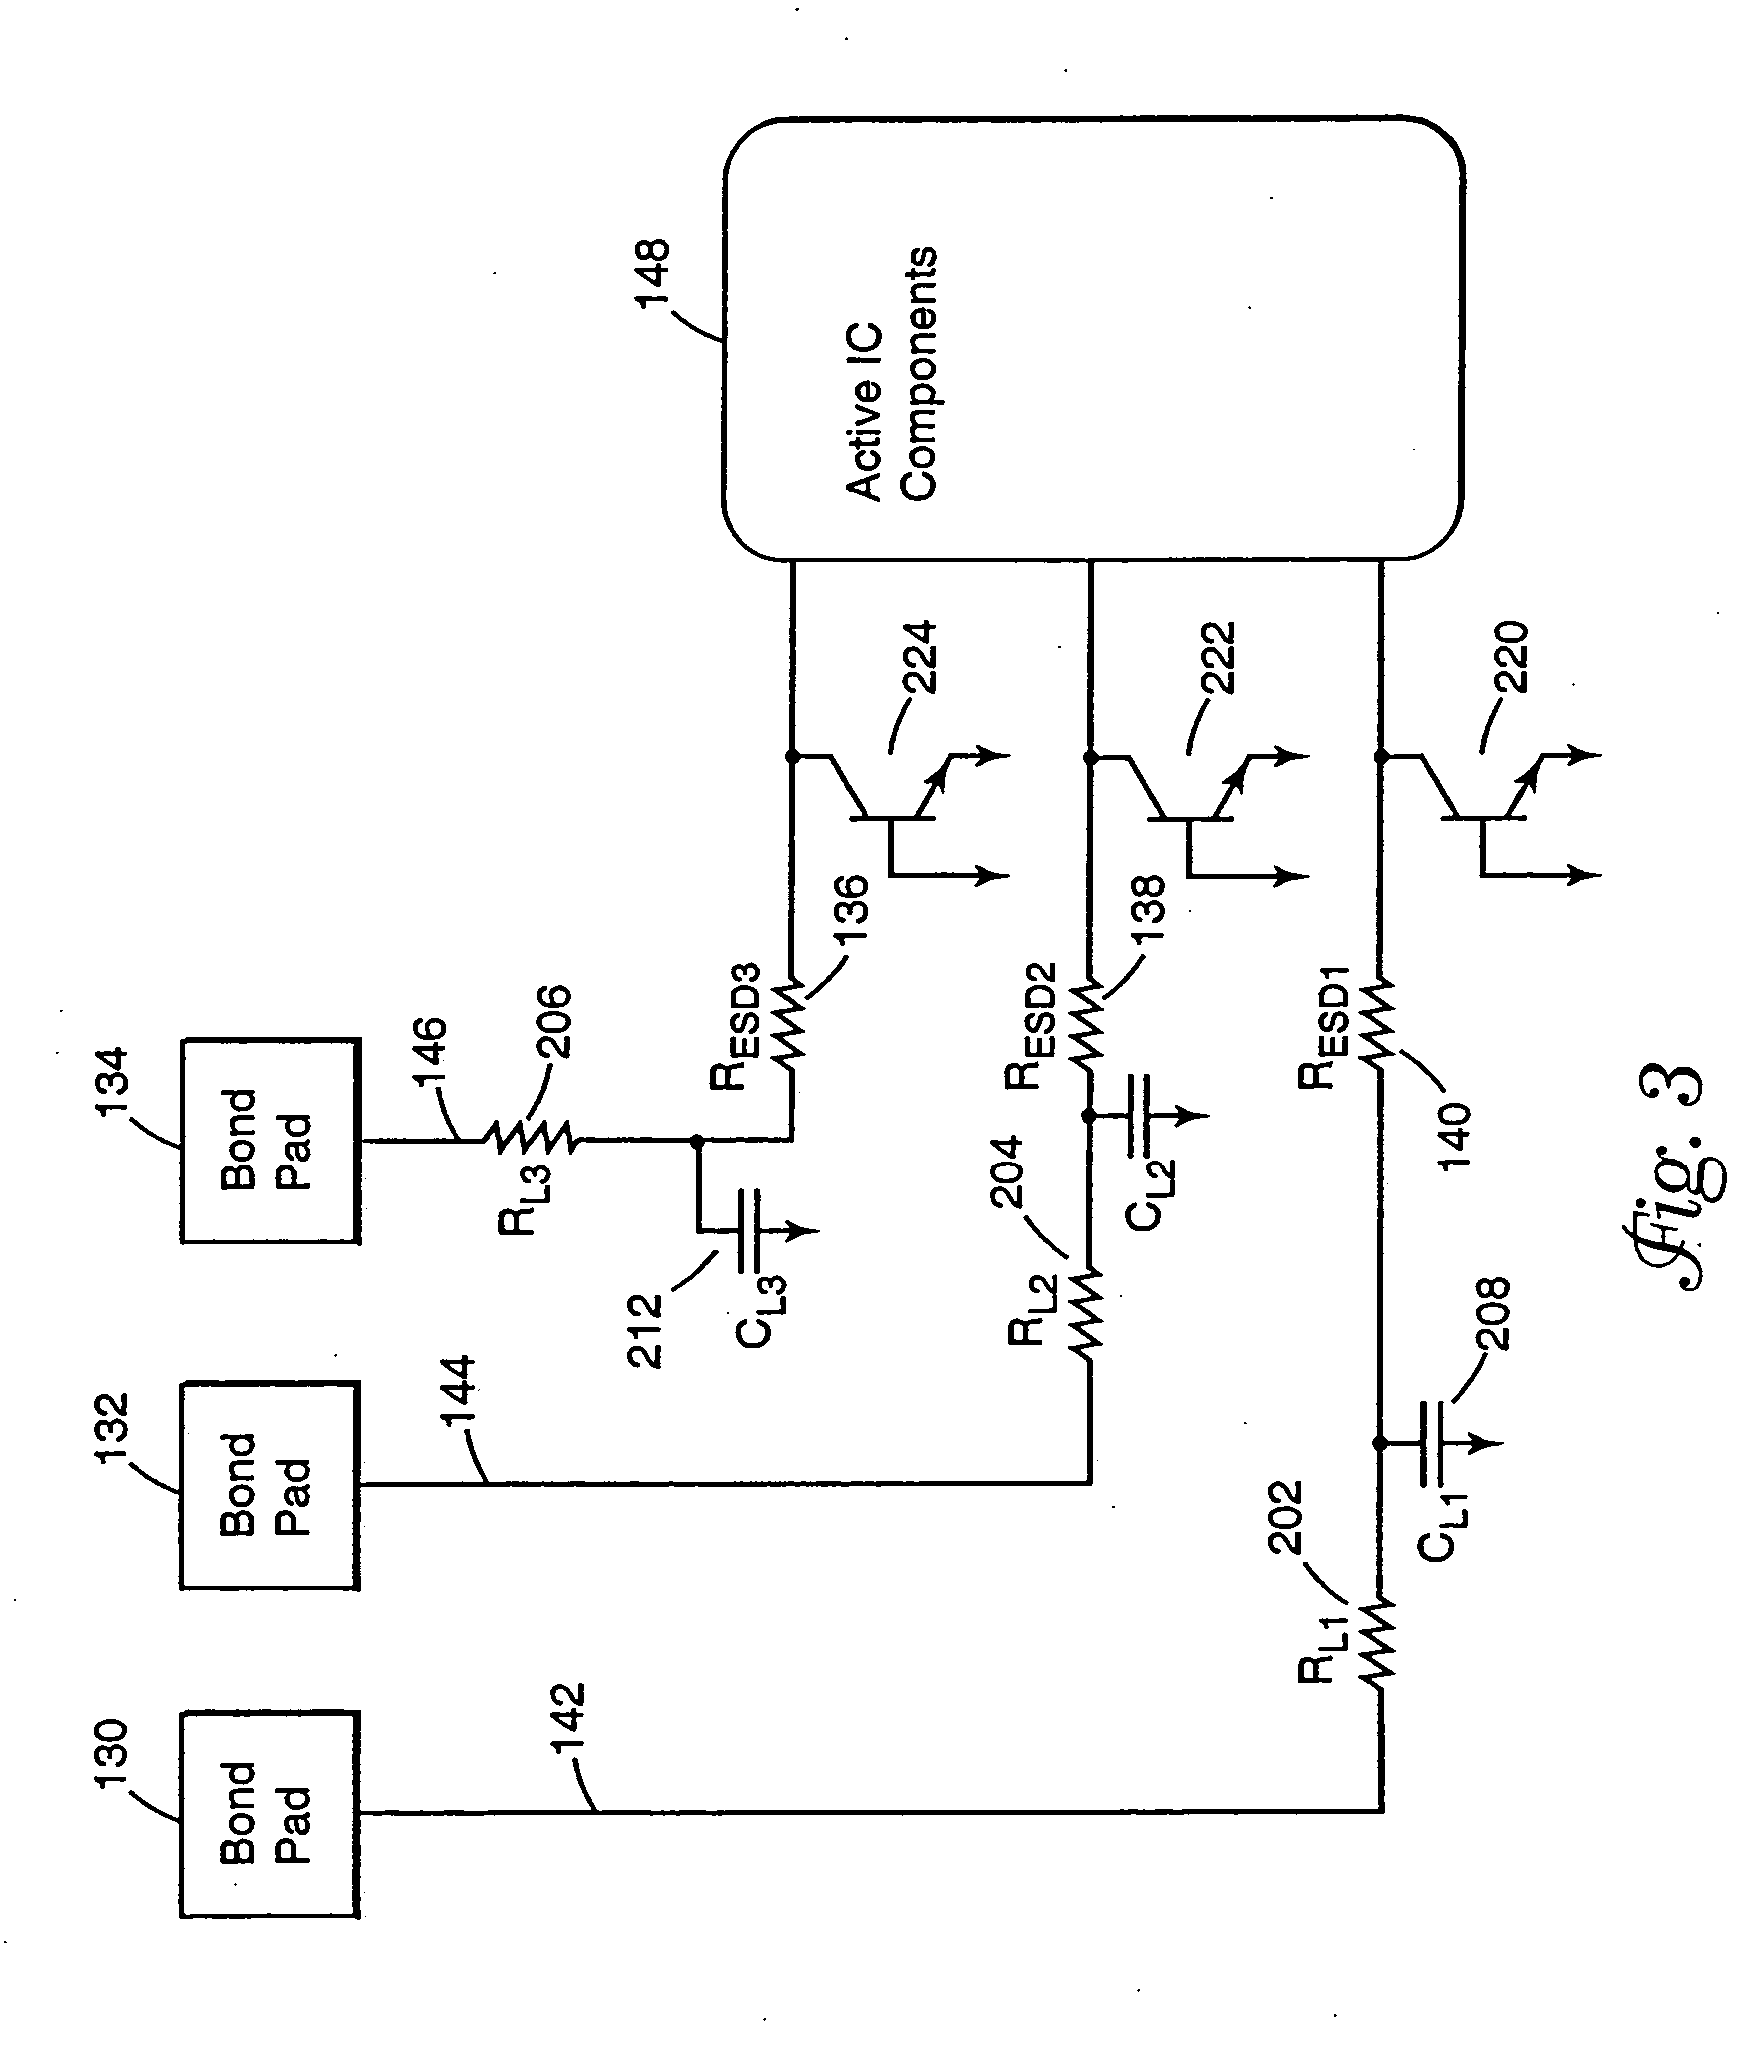 Electrostatic discharge protection with input impedance